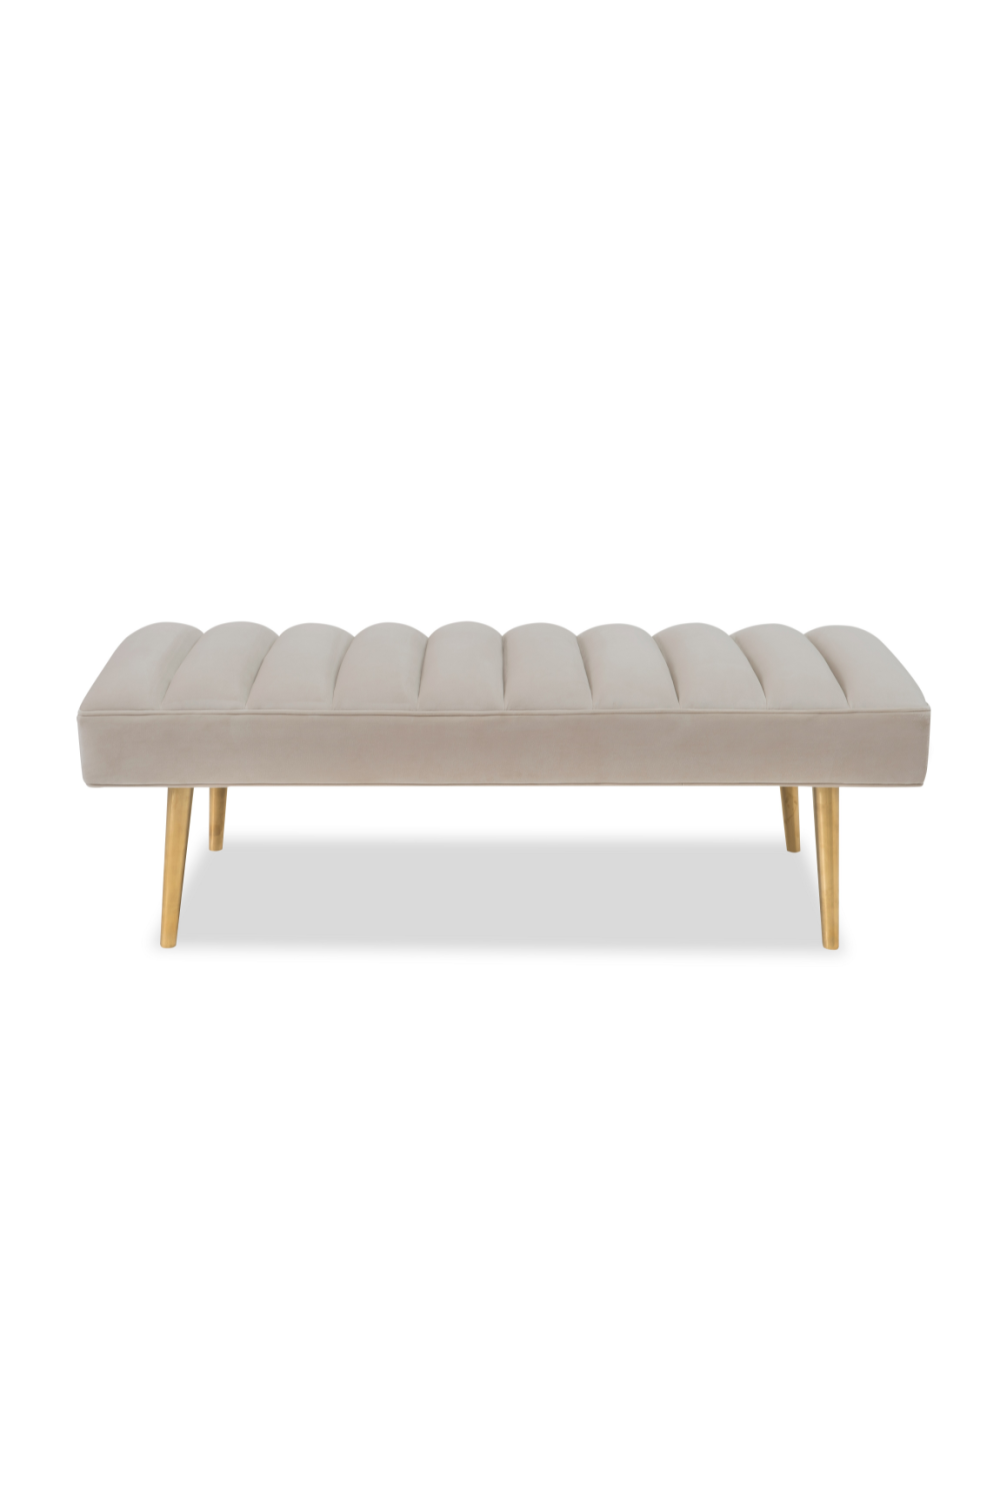 Upholstered Toscana Cream Bench | Liang & Eimil Rosso | OROA